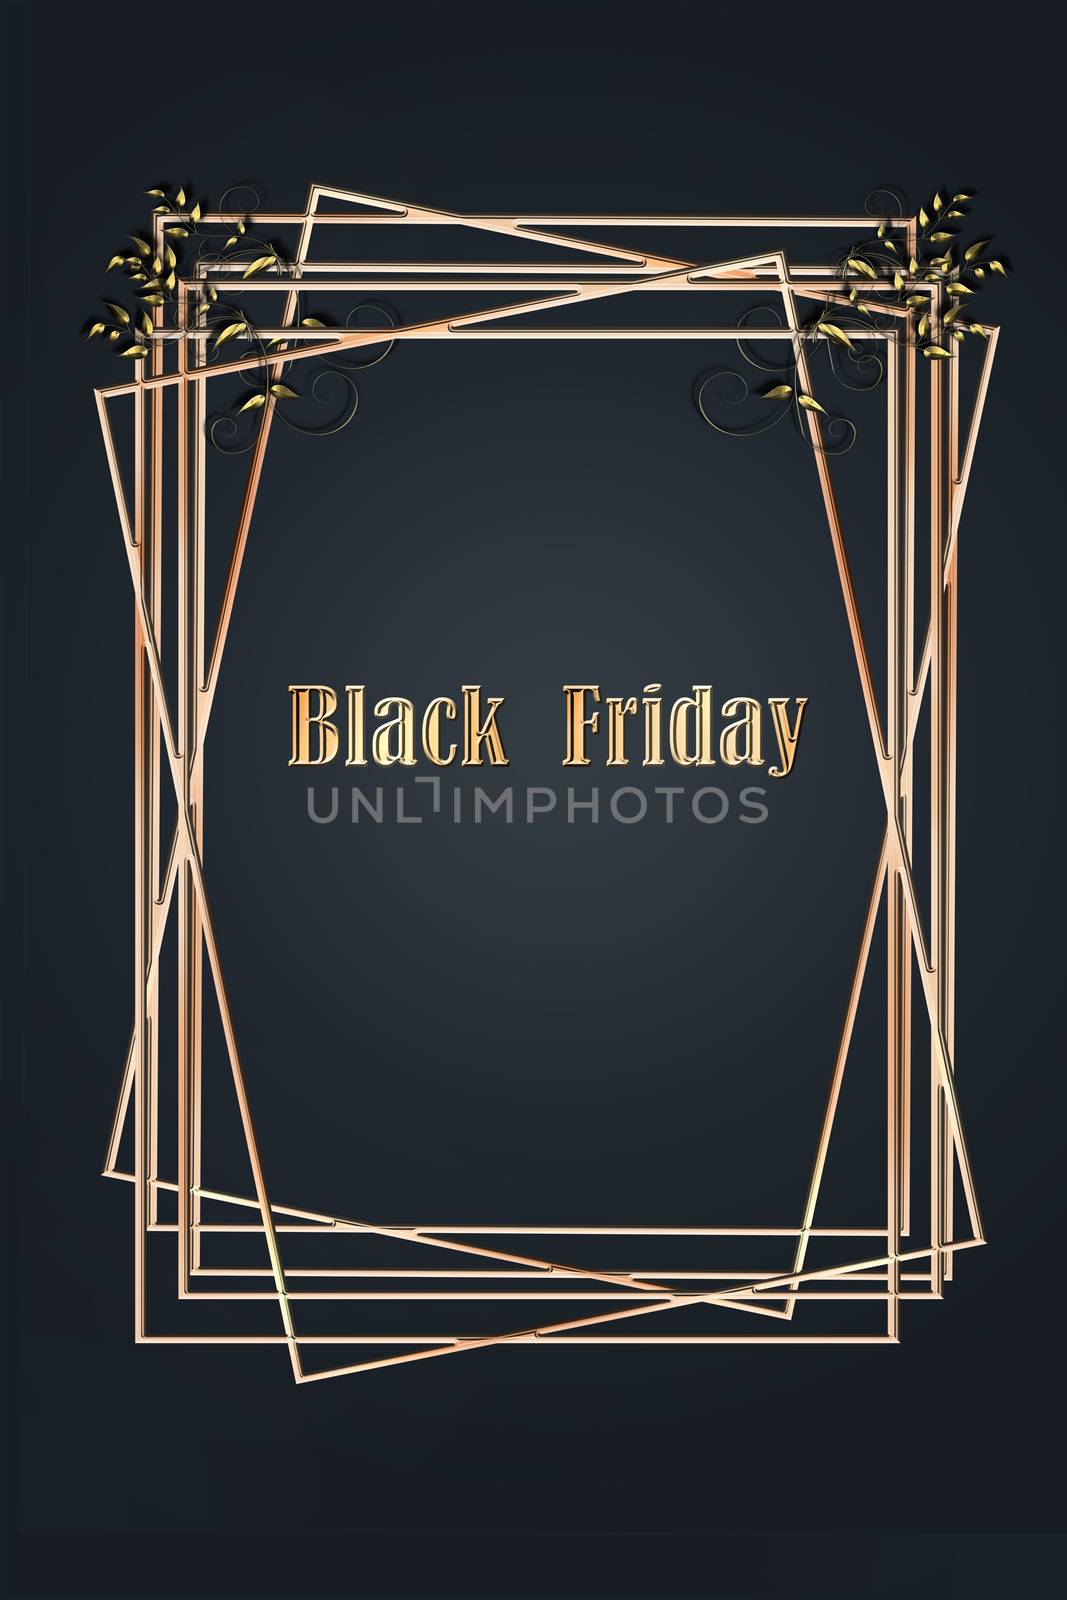 Sales poster with text Black Friday in golden border in gold shine effect on black background. Advertising Poster design. Sale Discount banners, labels, prints posters, web presentation. Illustration